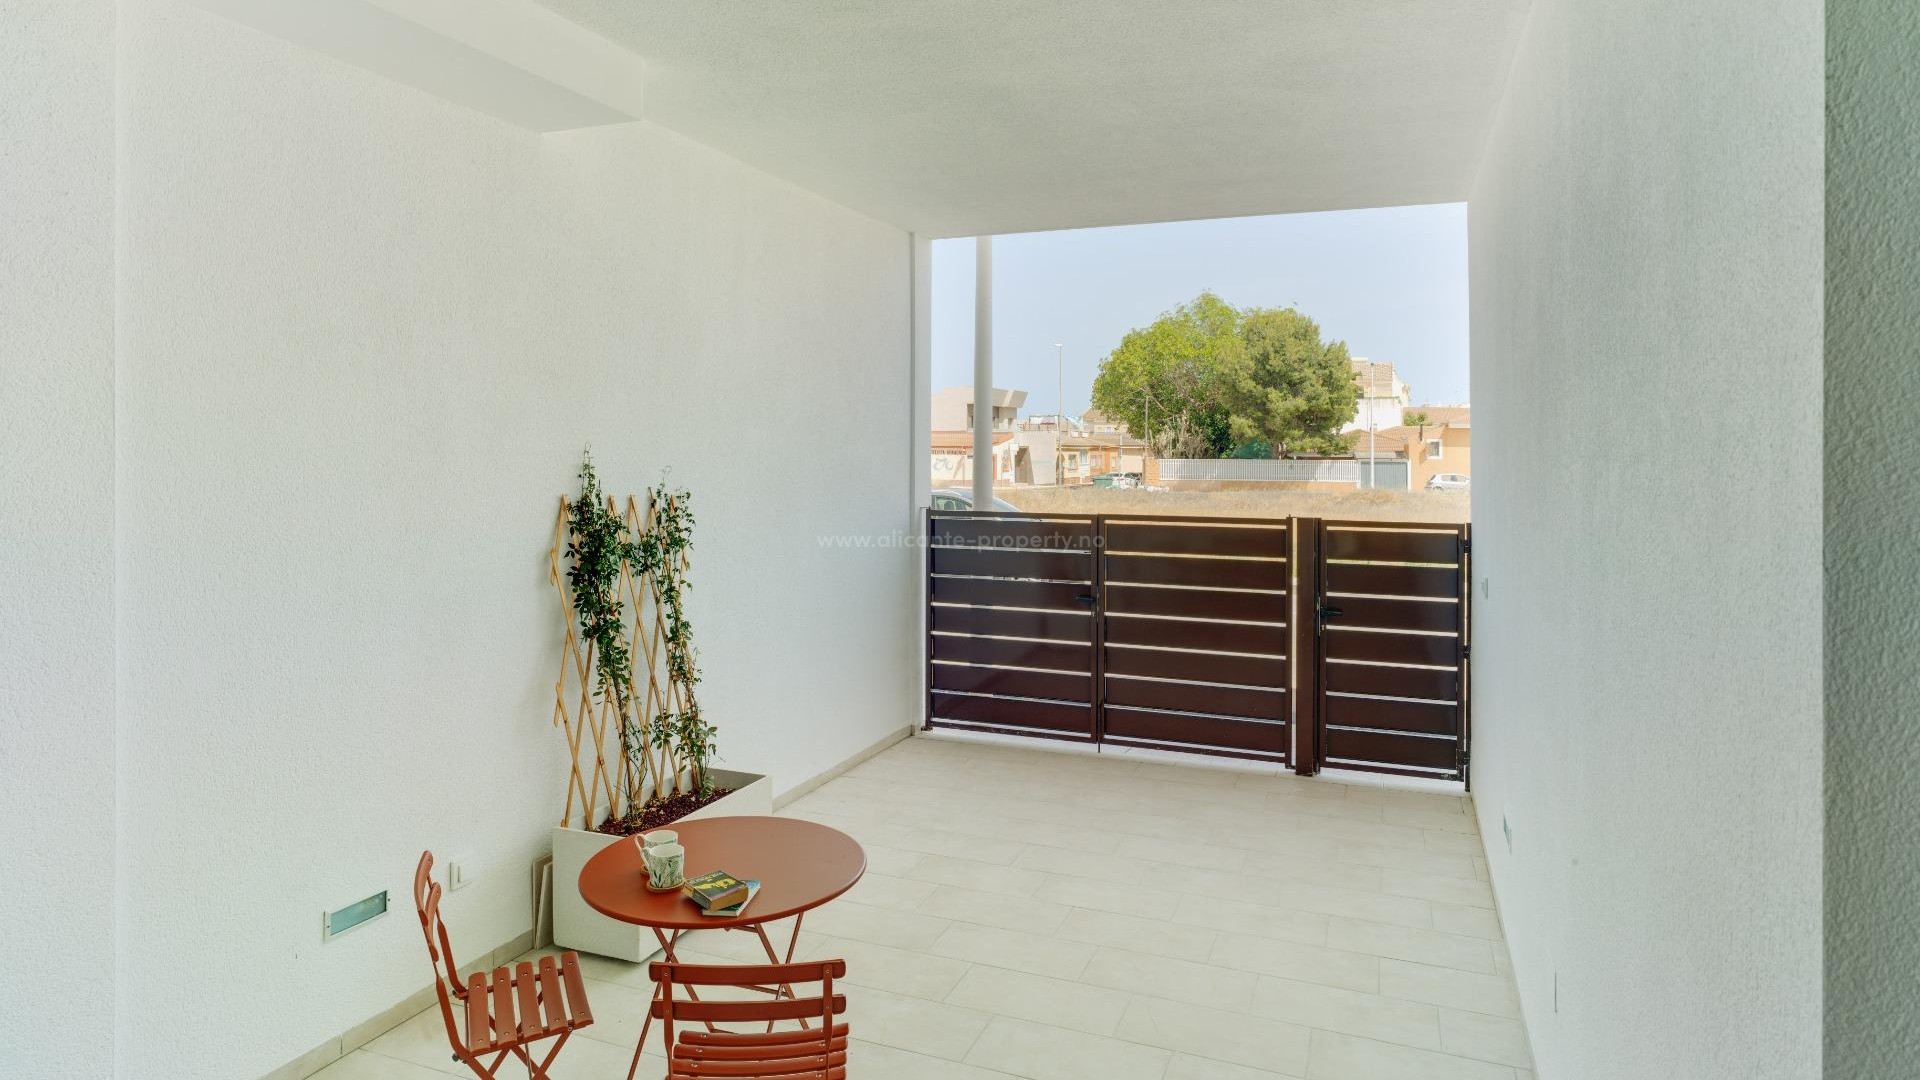 16 new bungalows and apartments in Pilar de La Horadada, 2/3 bedrooms, 2 bathrooms, communal pool, large terraces or roof terrace, private parking.